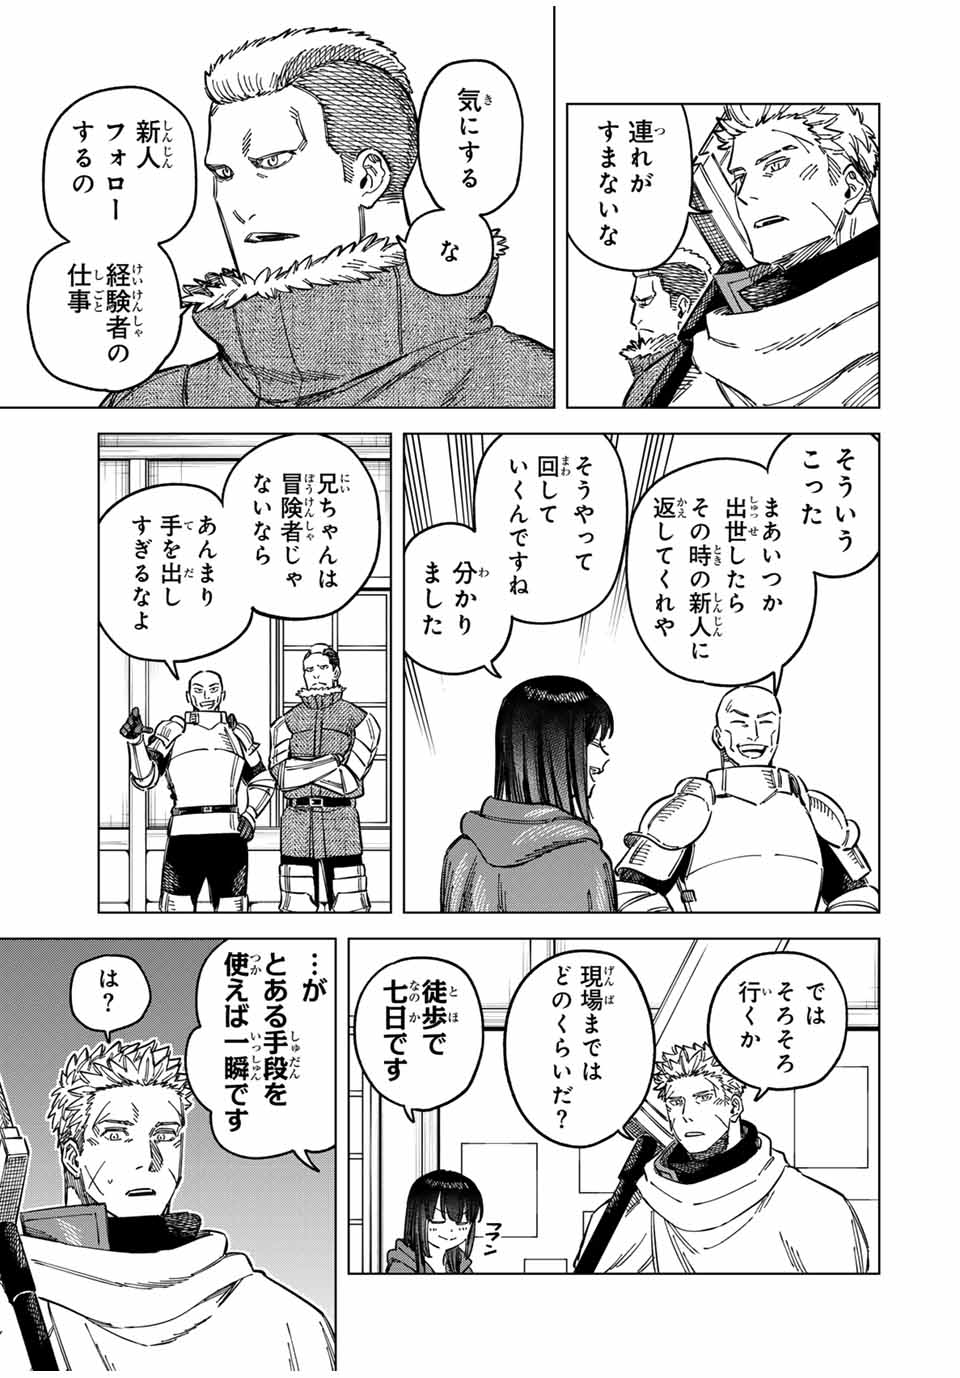 Witch and Mercenary 魔女と傭兵 第5.1話 - Page 15